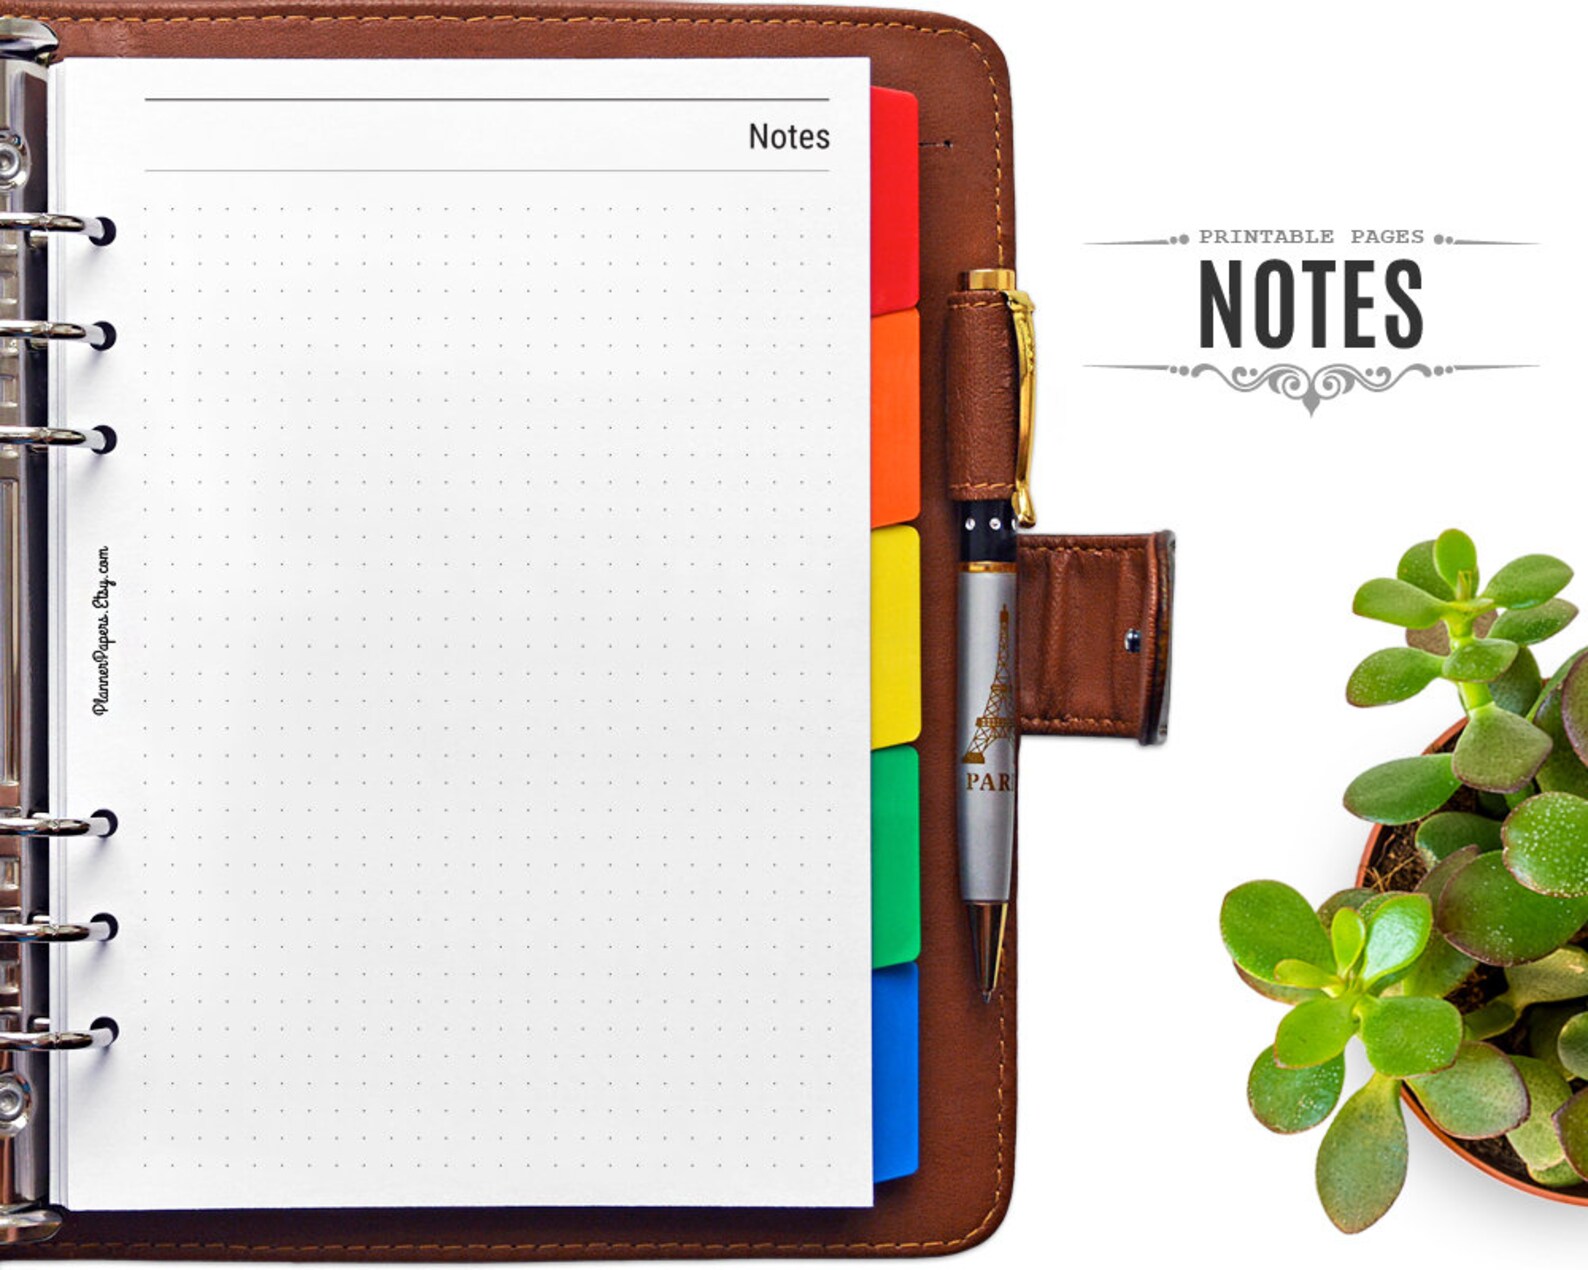 Notes Printable. Notes Grid. Note page